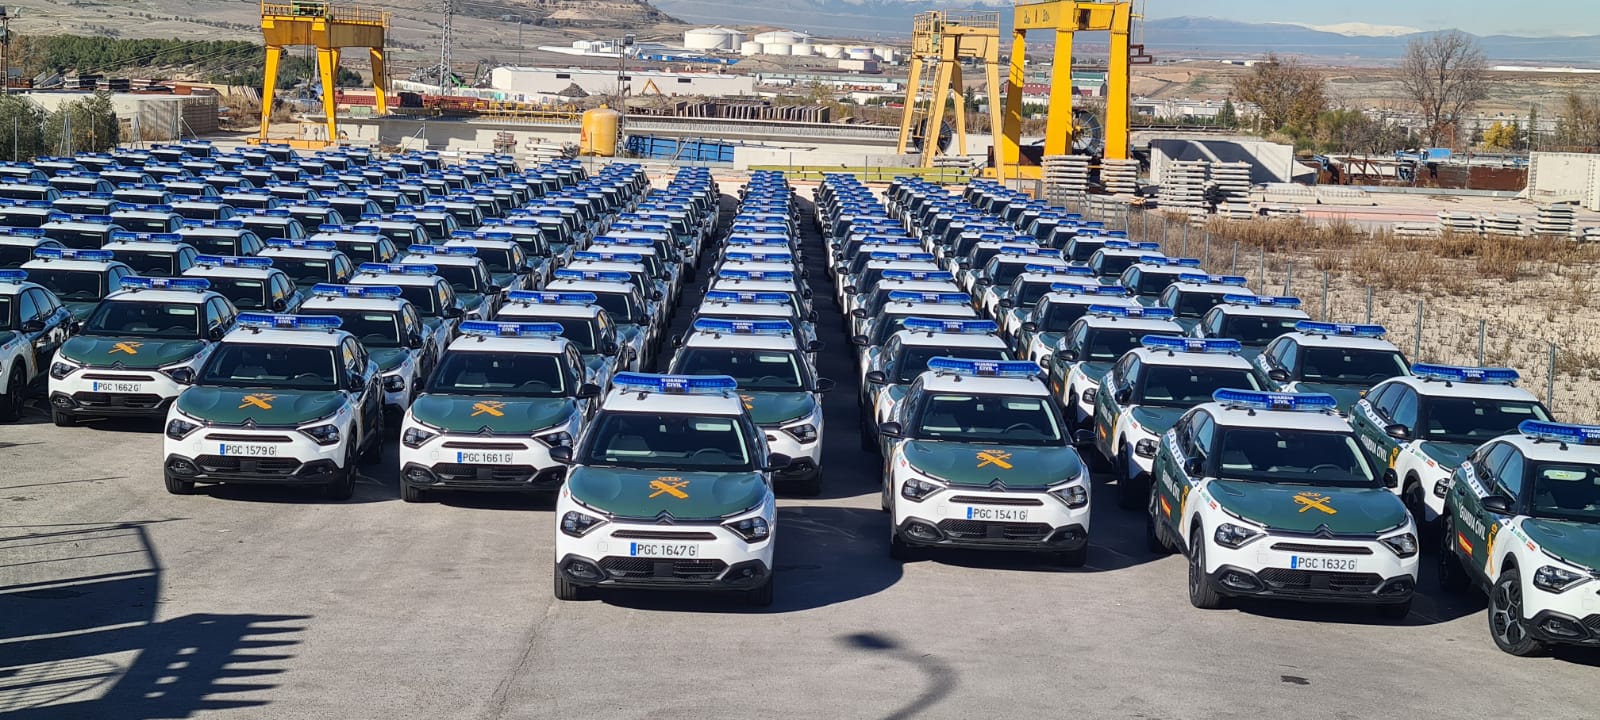 409 cars for the Civil Guard: electric will soon arrive